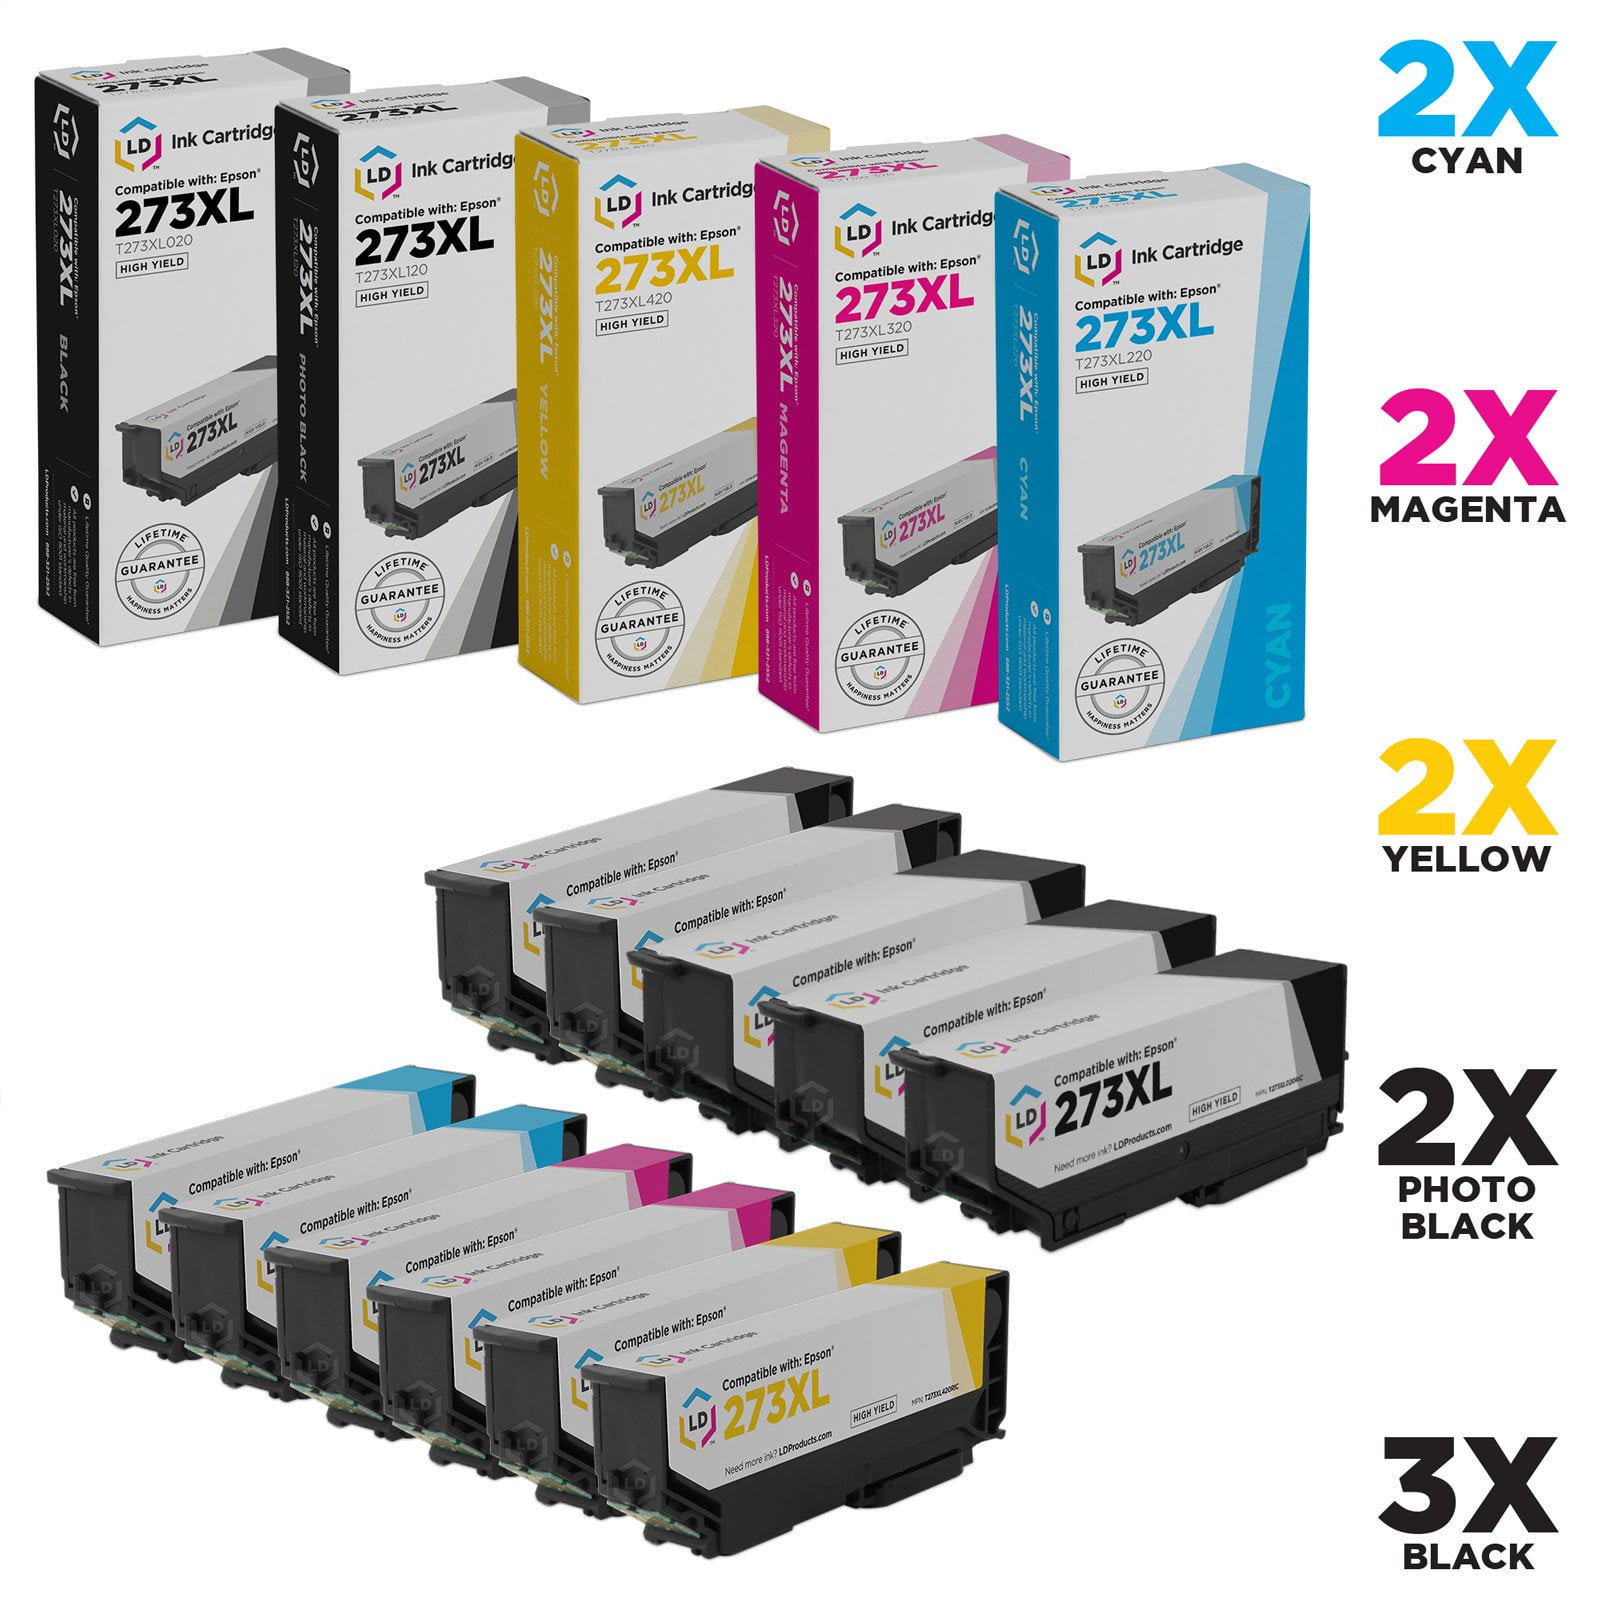 LD Remanufactured Replacement for Epson 273XL High Yield Ink Cartridges: 3 Black, 2 Photo Black, 2 Cyan, 2 Magenta, 2